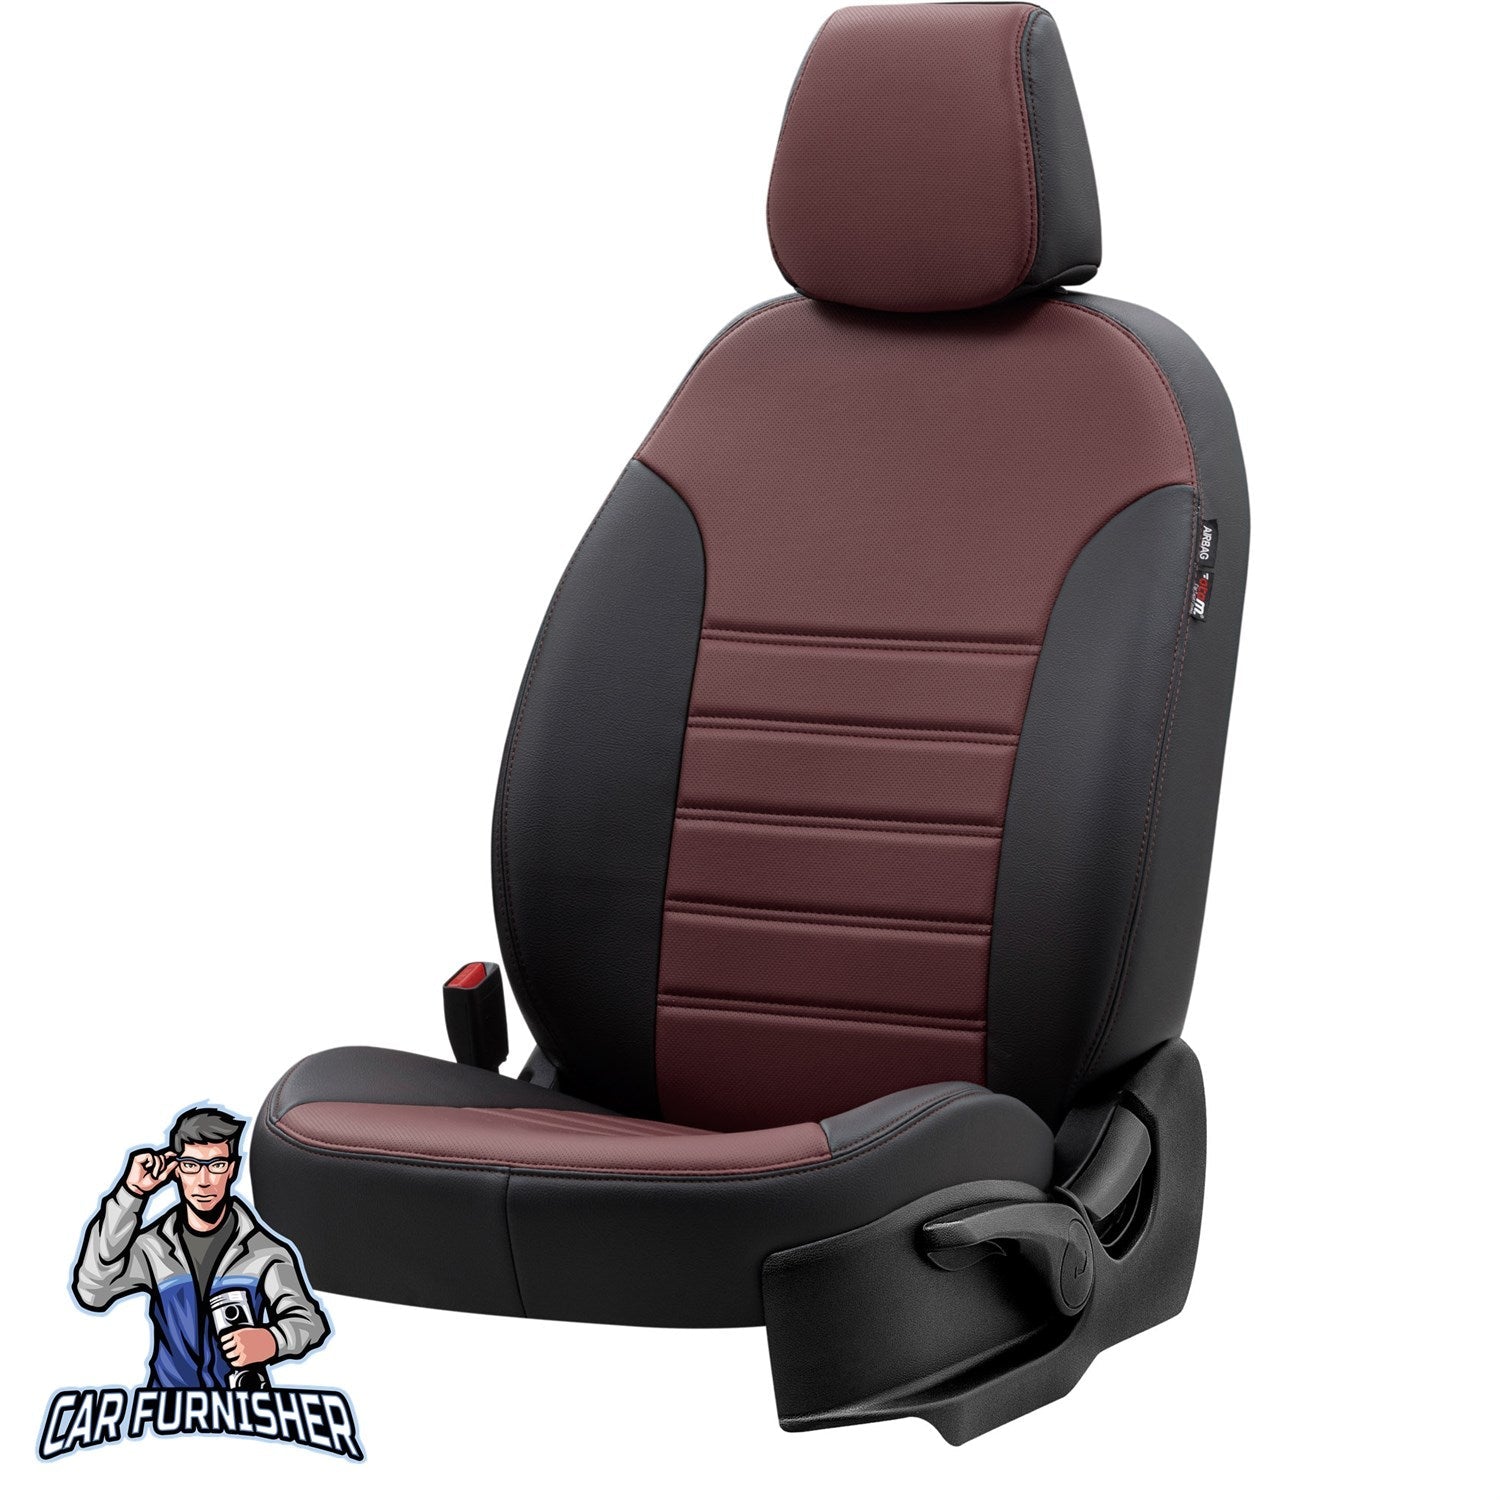 Volkswagen Amarok Seat Cover Istanbul Leather Design Burgundy Leather